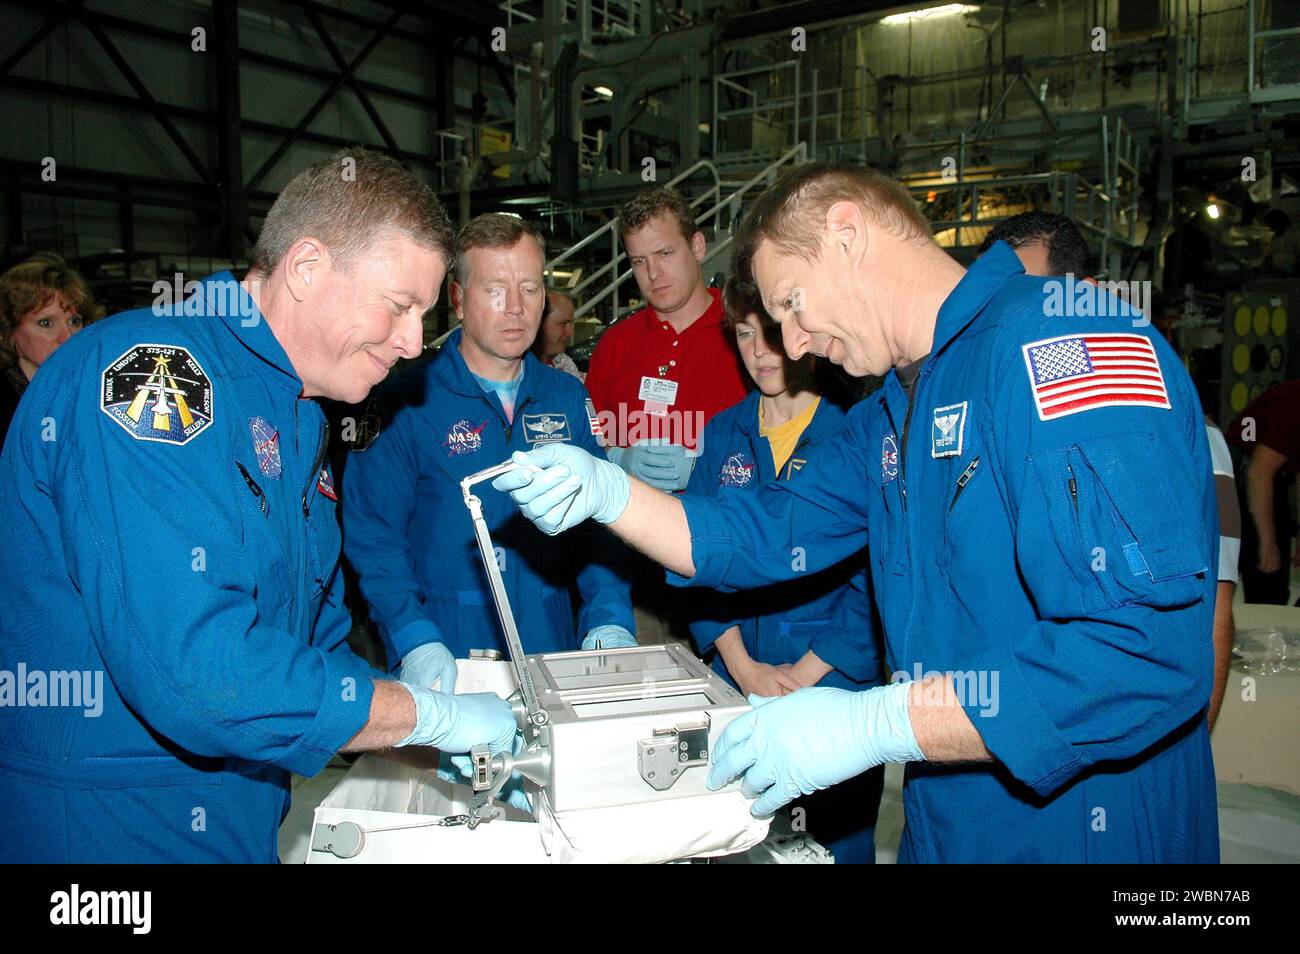 KENNEDY SPACE CENTER, FLA. - In the Orbiter Processing Facility at NASA’s Kennedy Space Center, astronauts of the second Return to Flight mission, STS-121, practice using the Tile Repair Kit. Crew members seen in this photo are, left to right, Mission Specialist Michael E. Fossum, Commander Steven W. Lindsey, and Mission Specialists Lisa Nowak and Piers J. Sellers. The crew is at KSC to participate in the Crew Equipment Interface Test (CEIT). During CEIT, the crew has an opportunity to get a hands-on look at the orbiter and equipment they will be working with on their missions. Mission STS-121 Stock Photo